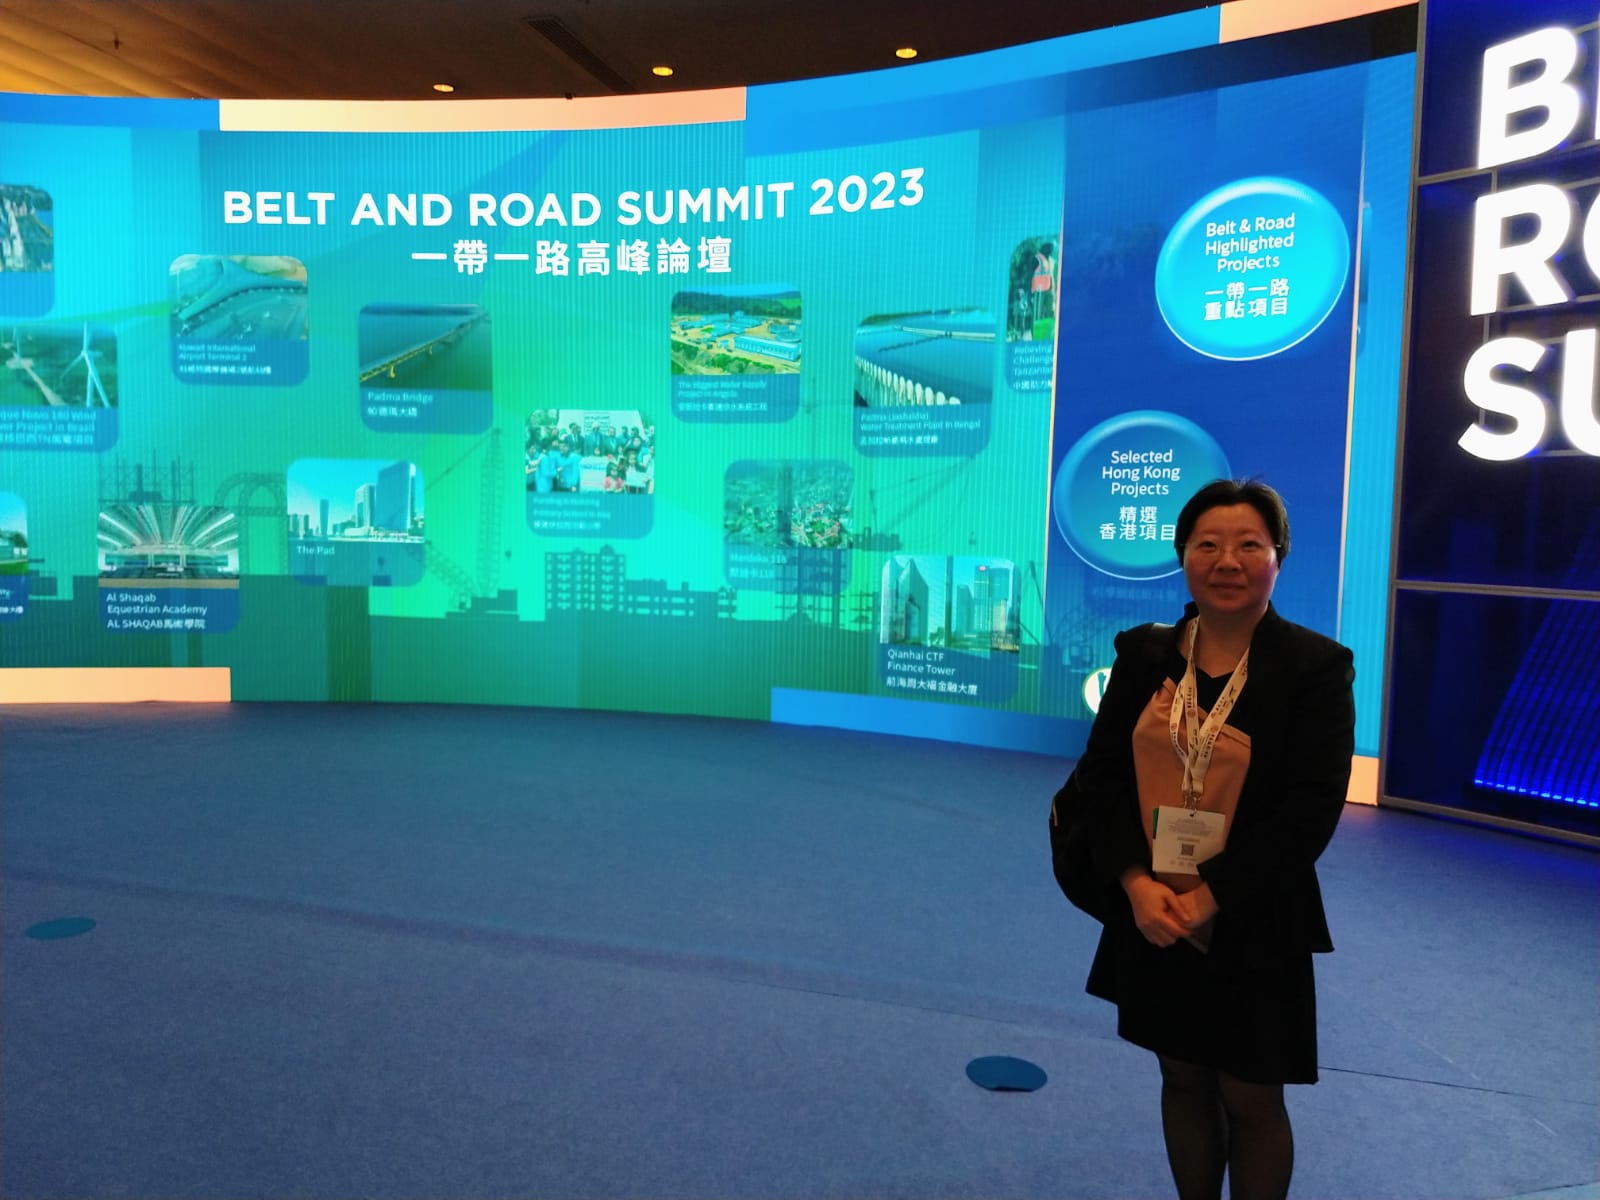 Flora at the Belt and Road Summit 2023